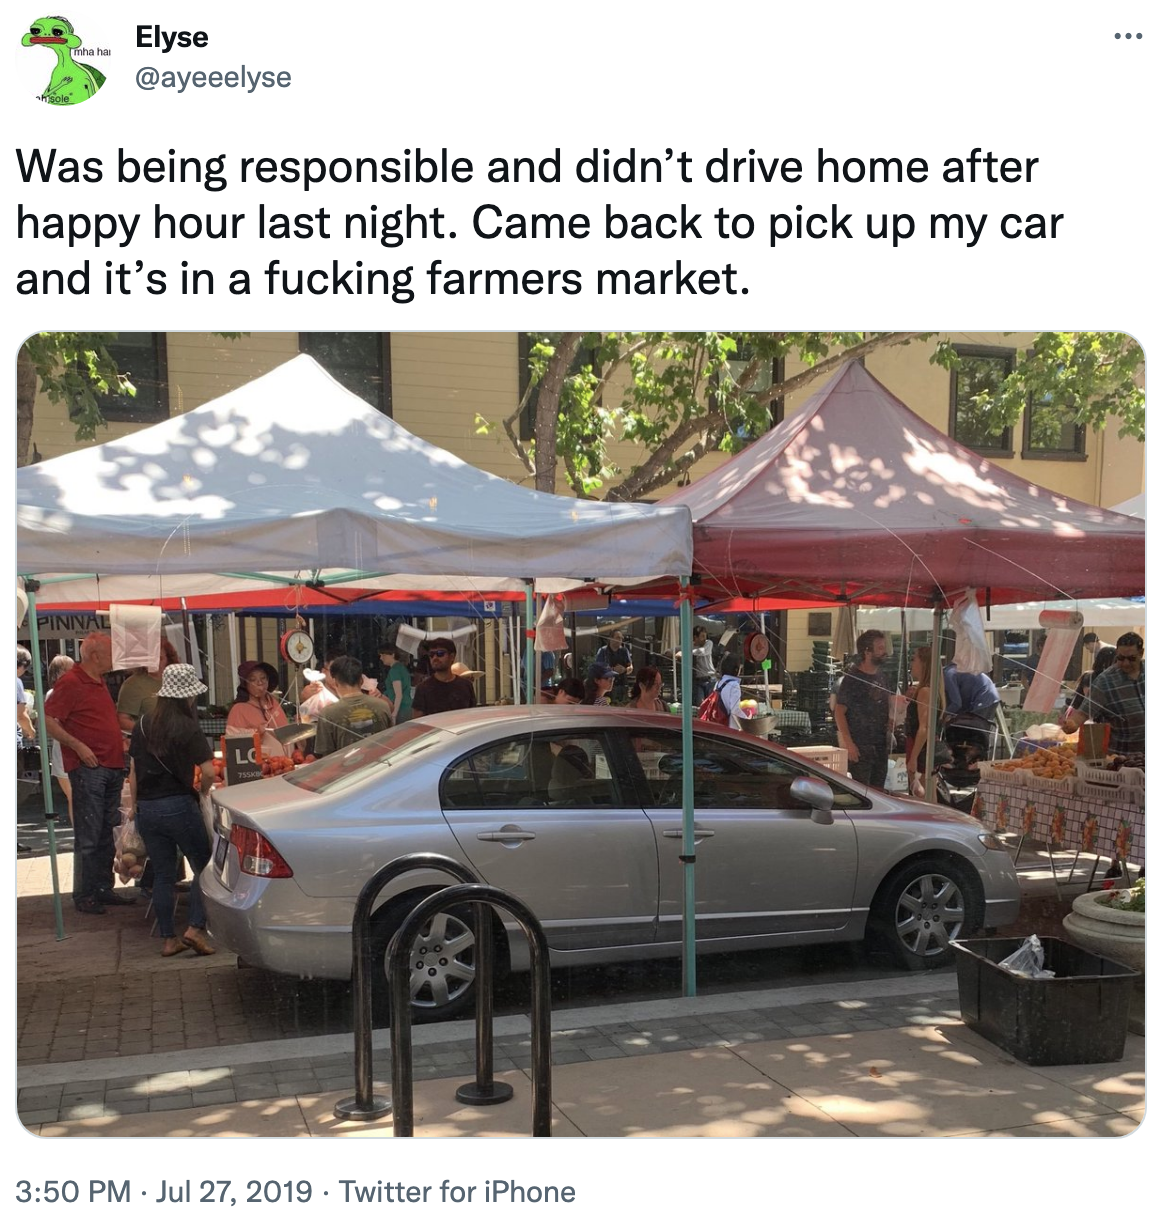 was being responsible and didn&#x27;t drive home after happy hour last night. came back to pick up my car and it&#x27;s in a fucking farmer&#x27;s market. including the photo with the car underneath some tents while people sell